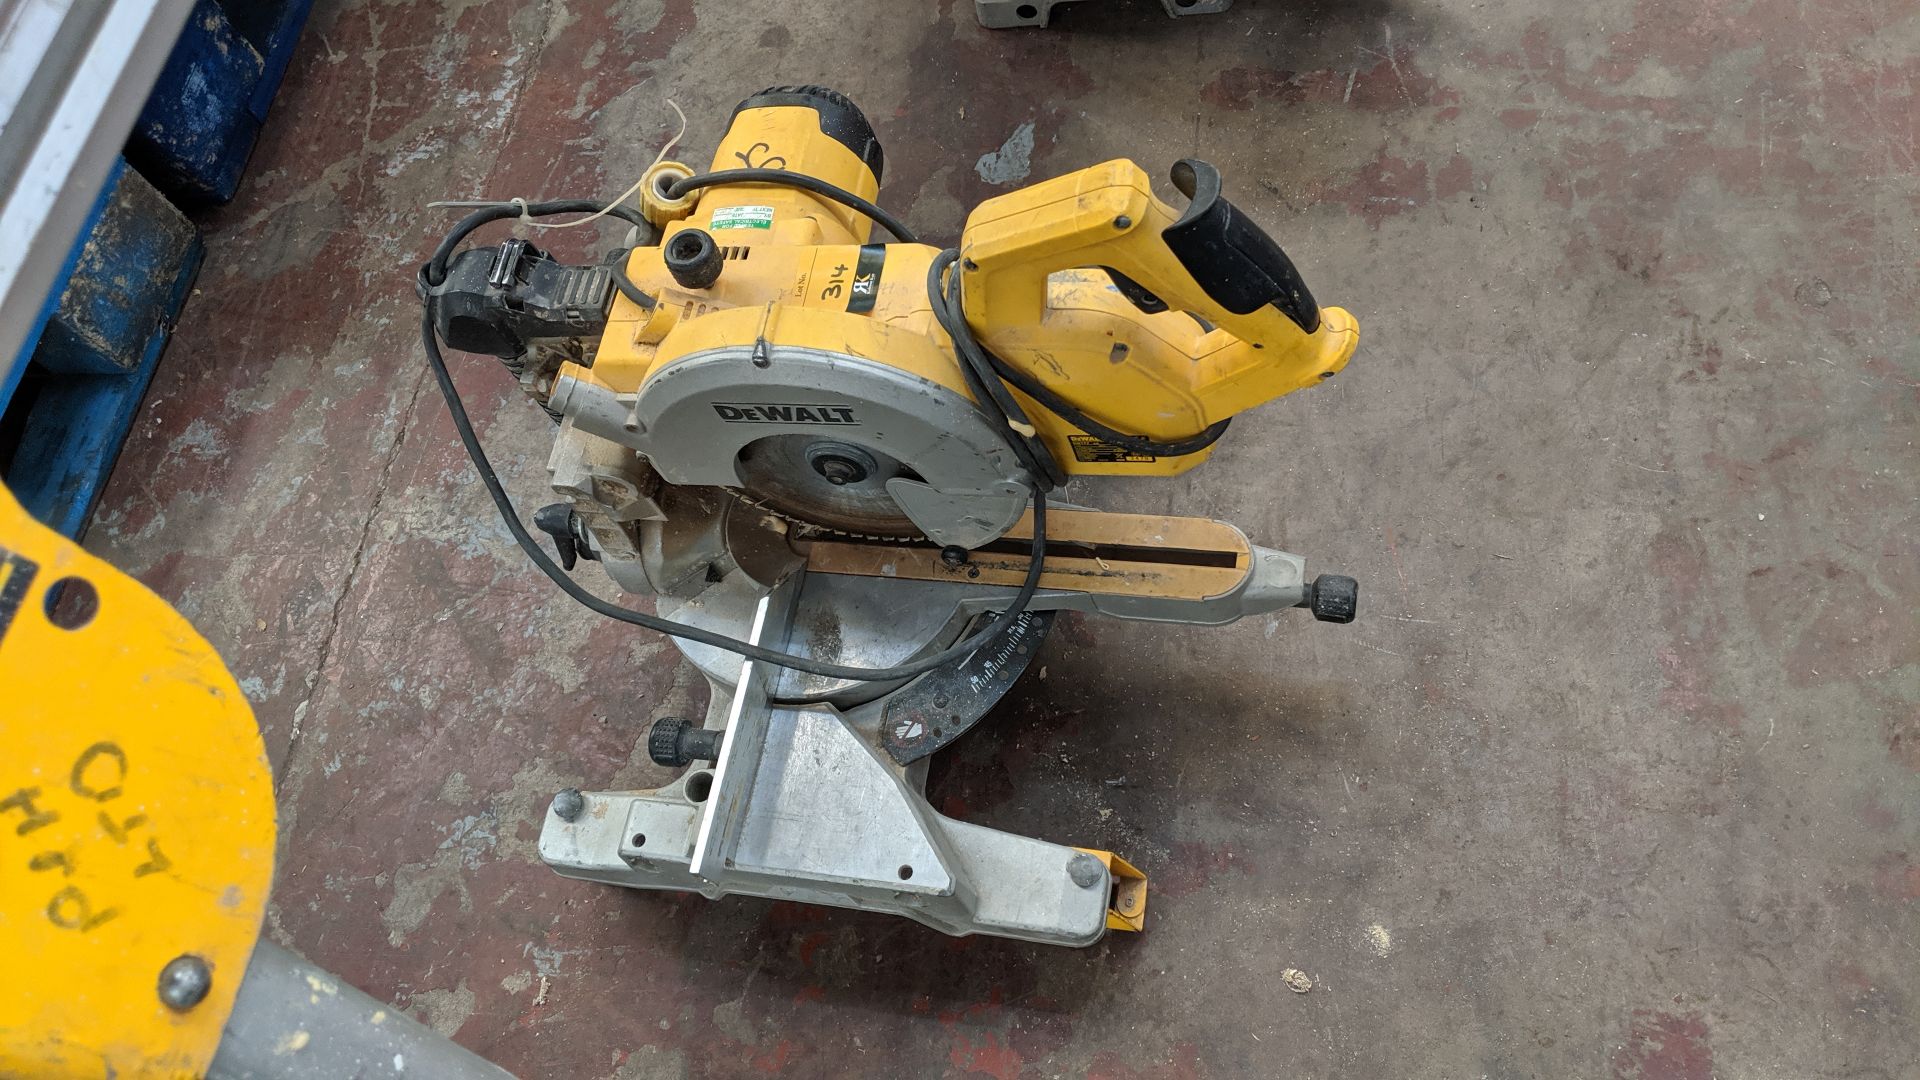 DeWalt 110V DW777-LX mitre saw IMPORTANT: Please remember goods successfully bid upon must be paid - Image 3 of 4